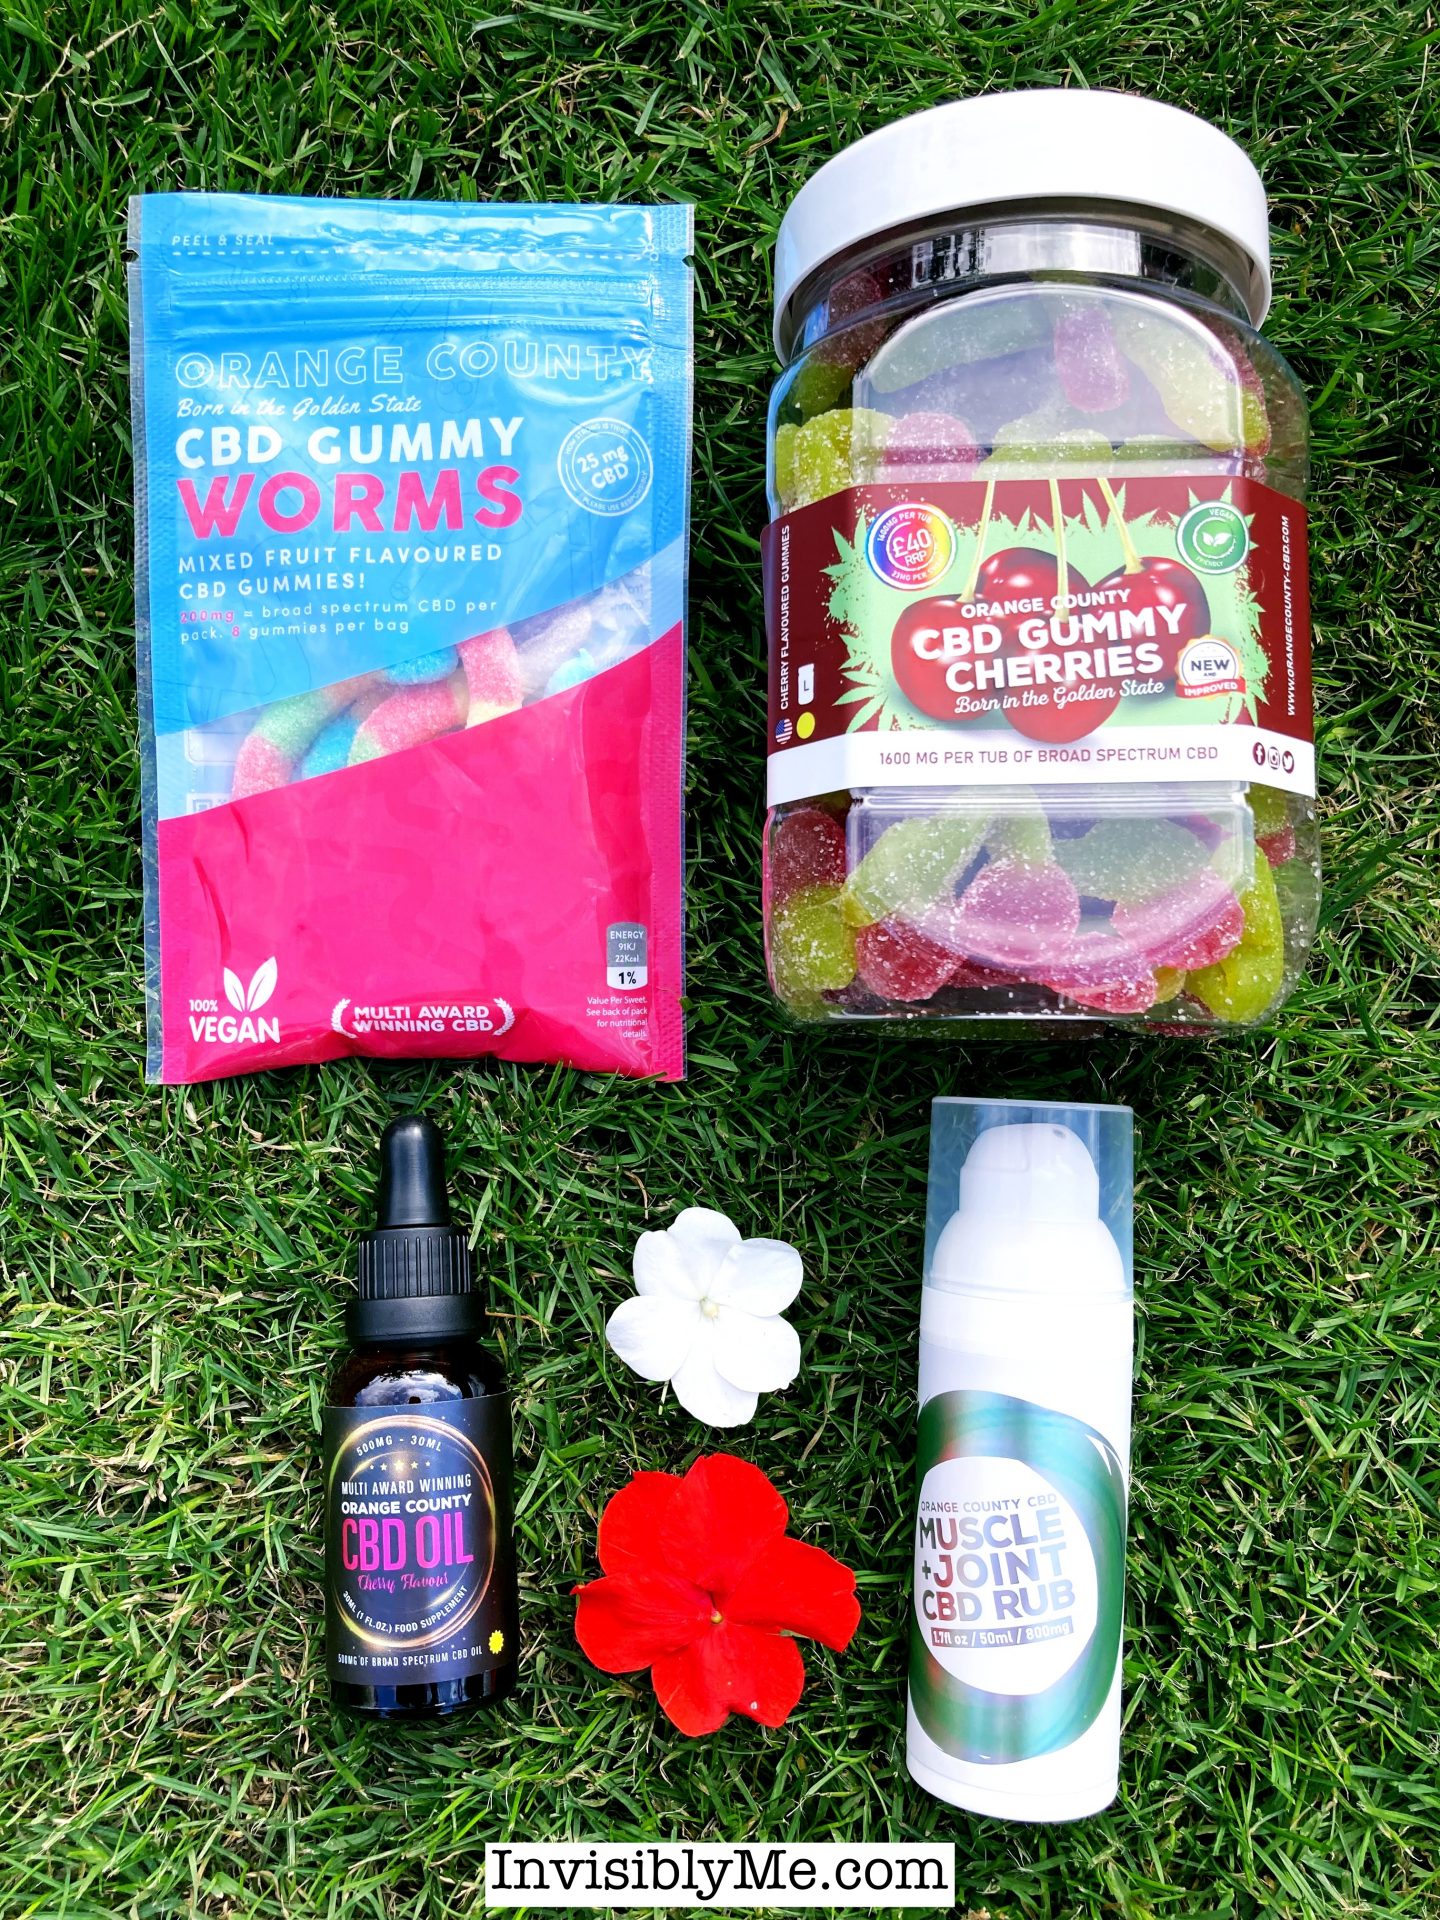 A bird's eye view on the grass of the four products from Orange County for this review. A red flower and a white flower are between the products to add some extra colour.